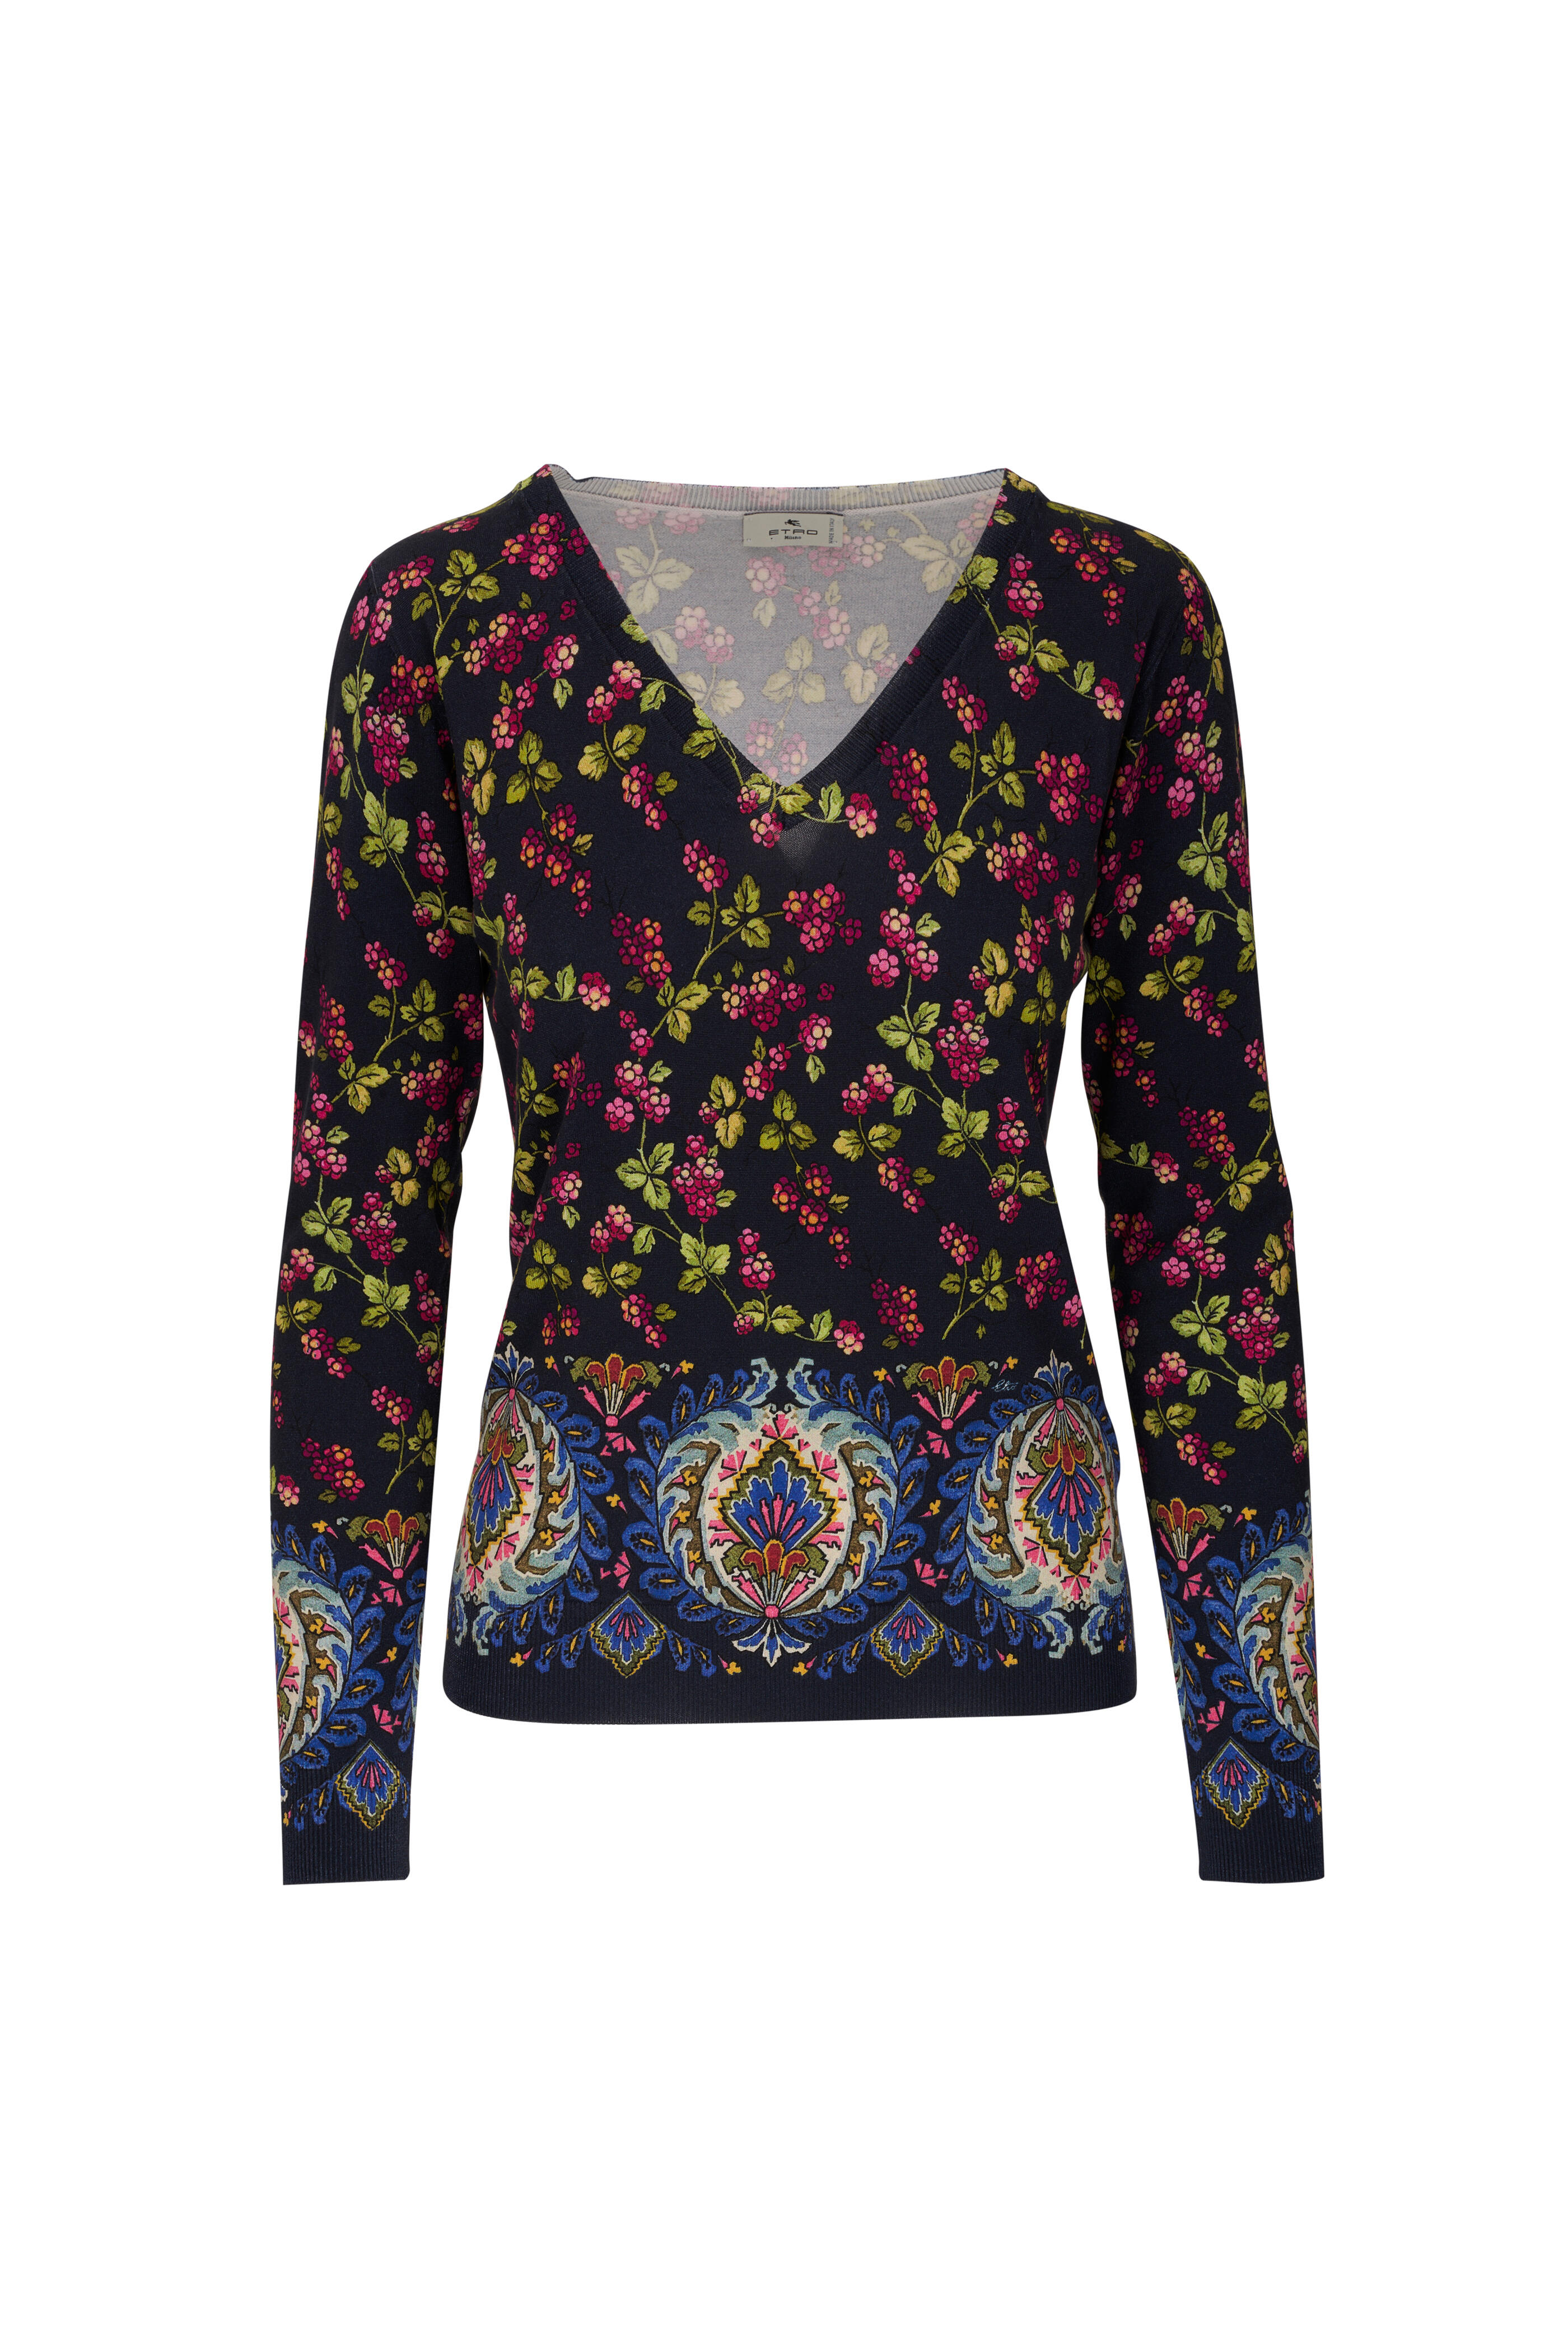 Etro wool sweater with Paisley pattern